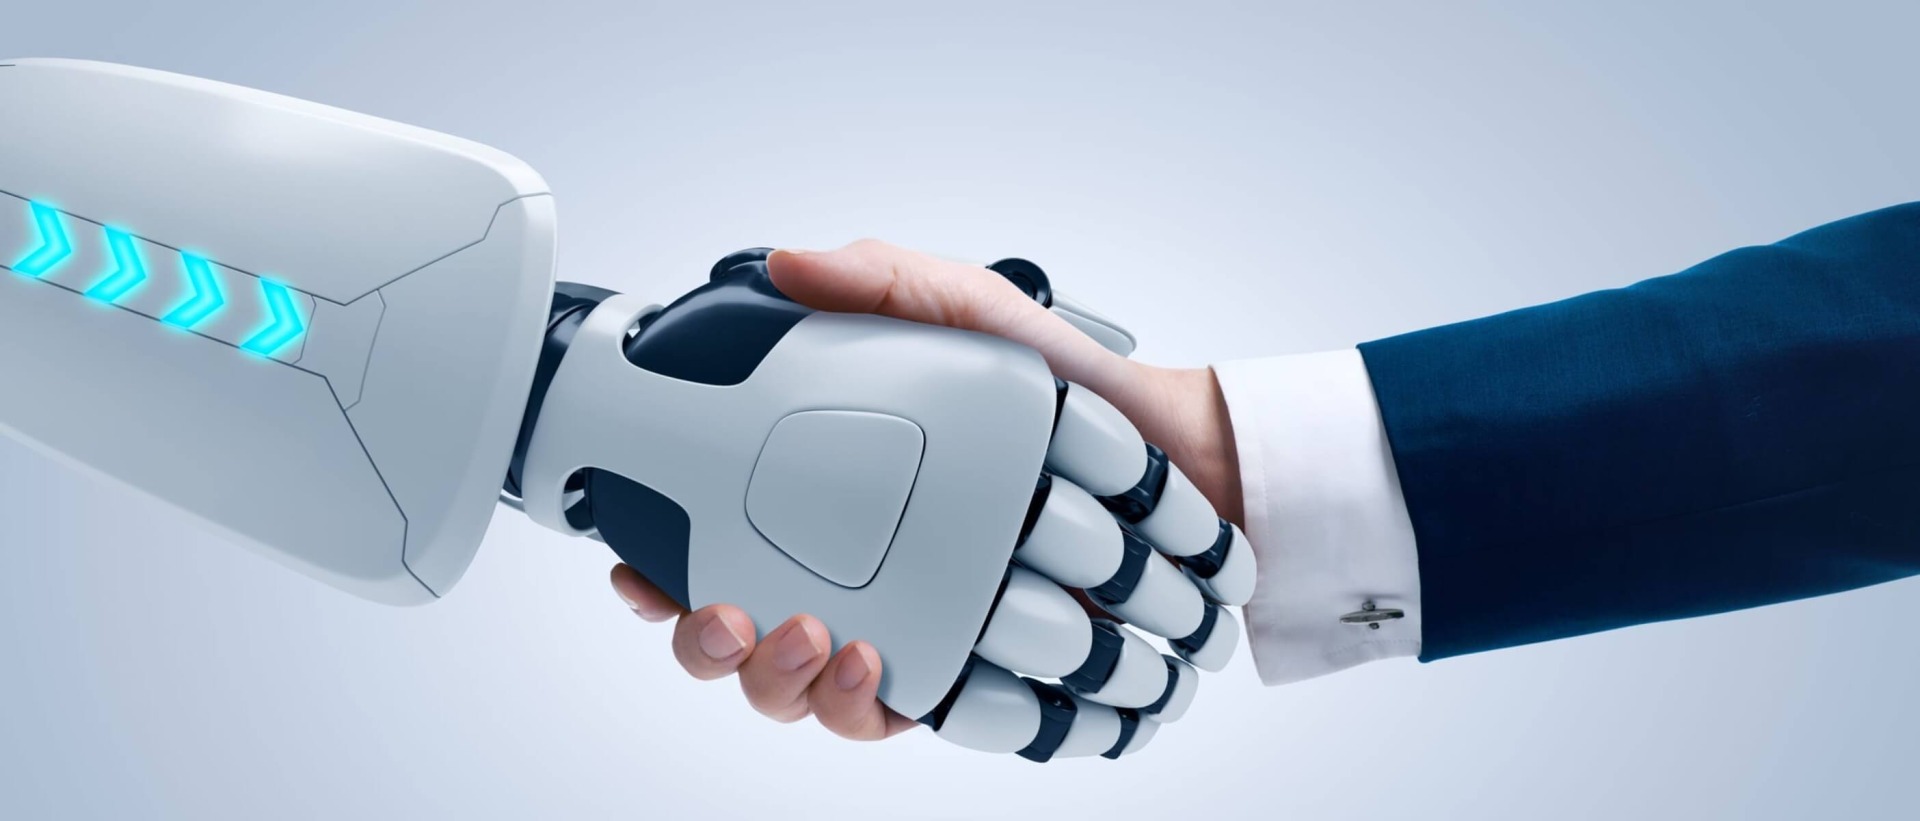 Five Indicators of the Increasing Adoption of Robots in Business and Beyond